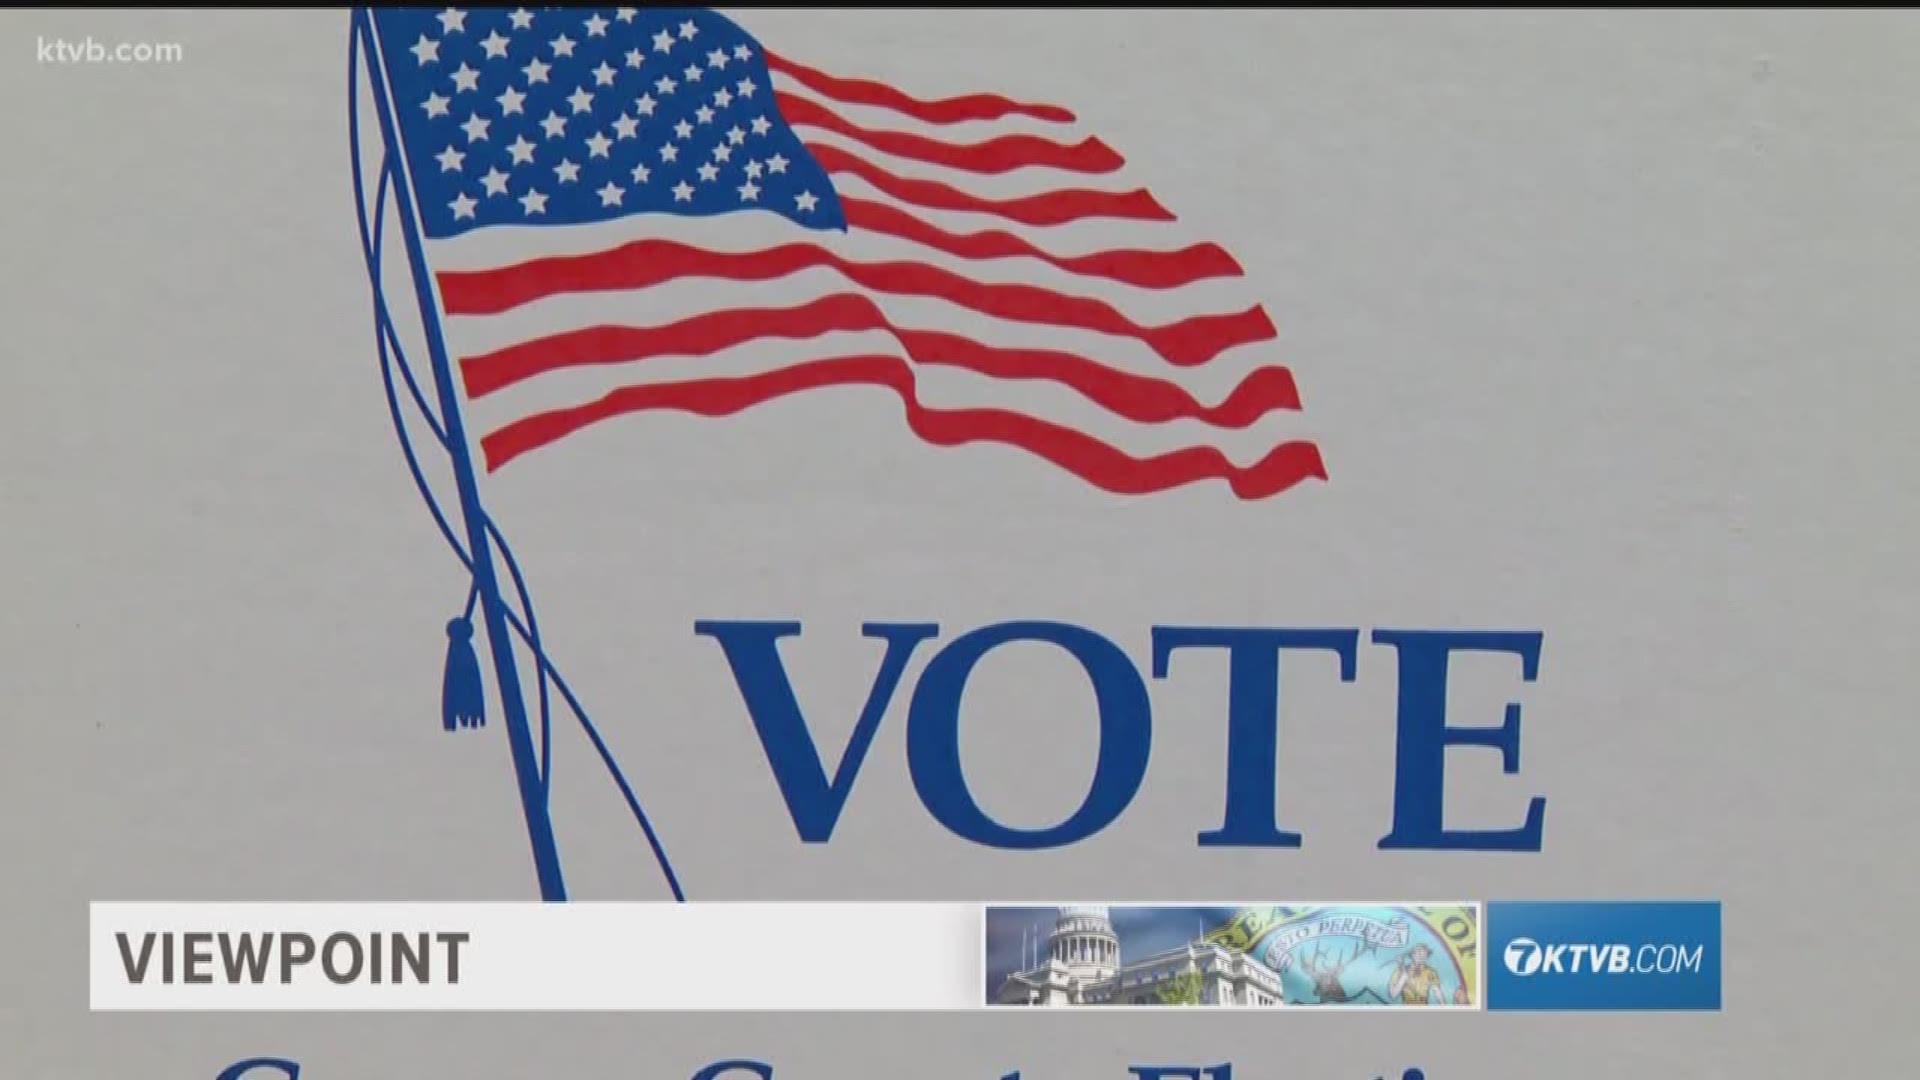 On Viewpoint, we look at the primary process and how safe Idaho's election system is from cyber-tampering. Plus, constitutional law scholar and Alturas Institute President Dr. Dave Adler discusses the constitution and the presidency in light of the Muelle